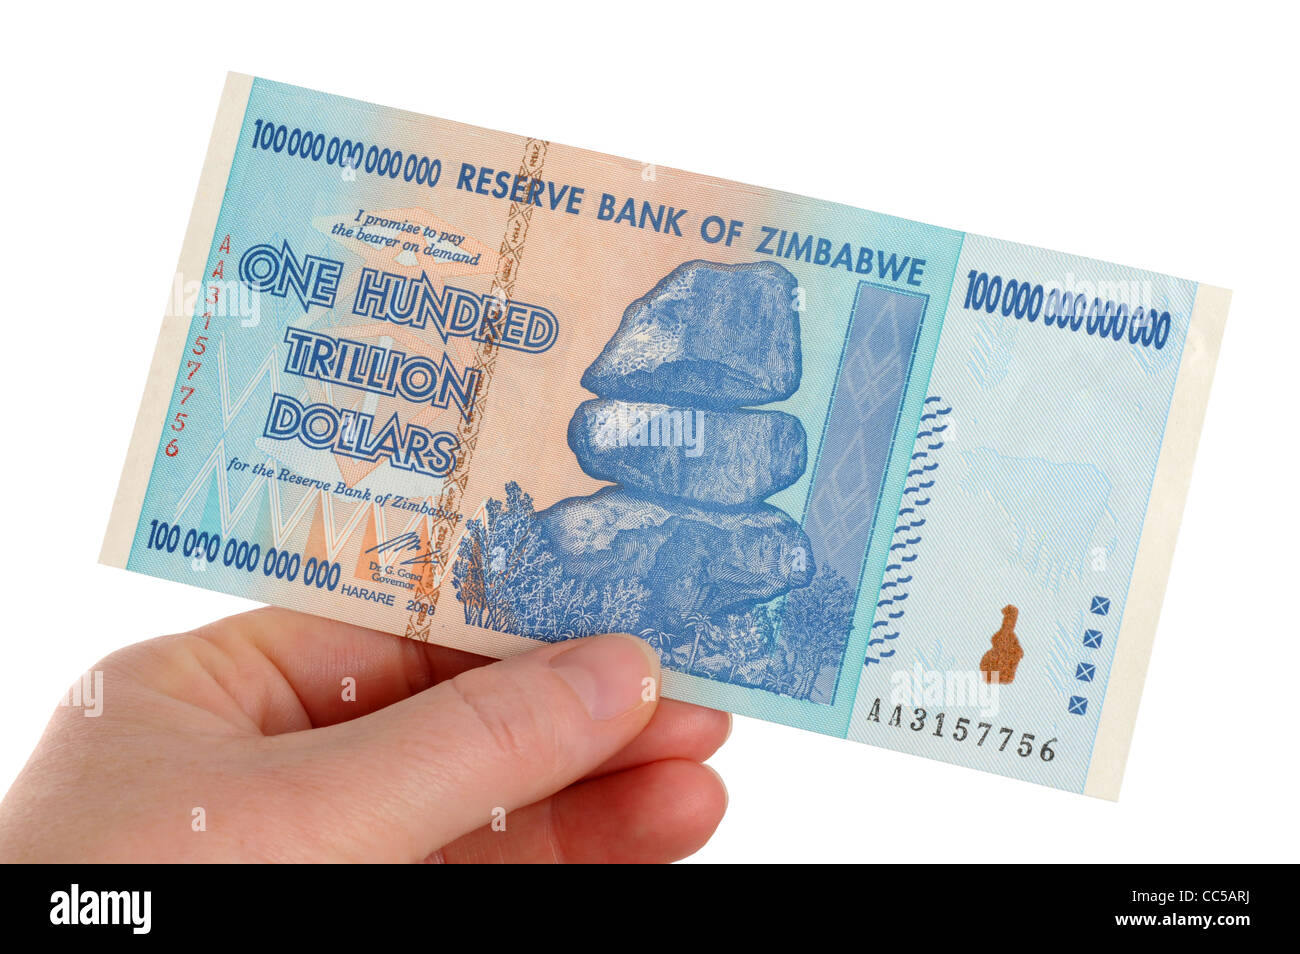 One Hundred Trillion Dollar Bank Note, One Hundred Trillion Dollar Zimbabwe Bank Note Stock Photo